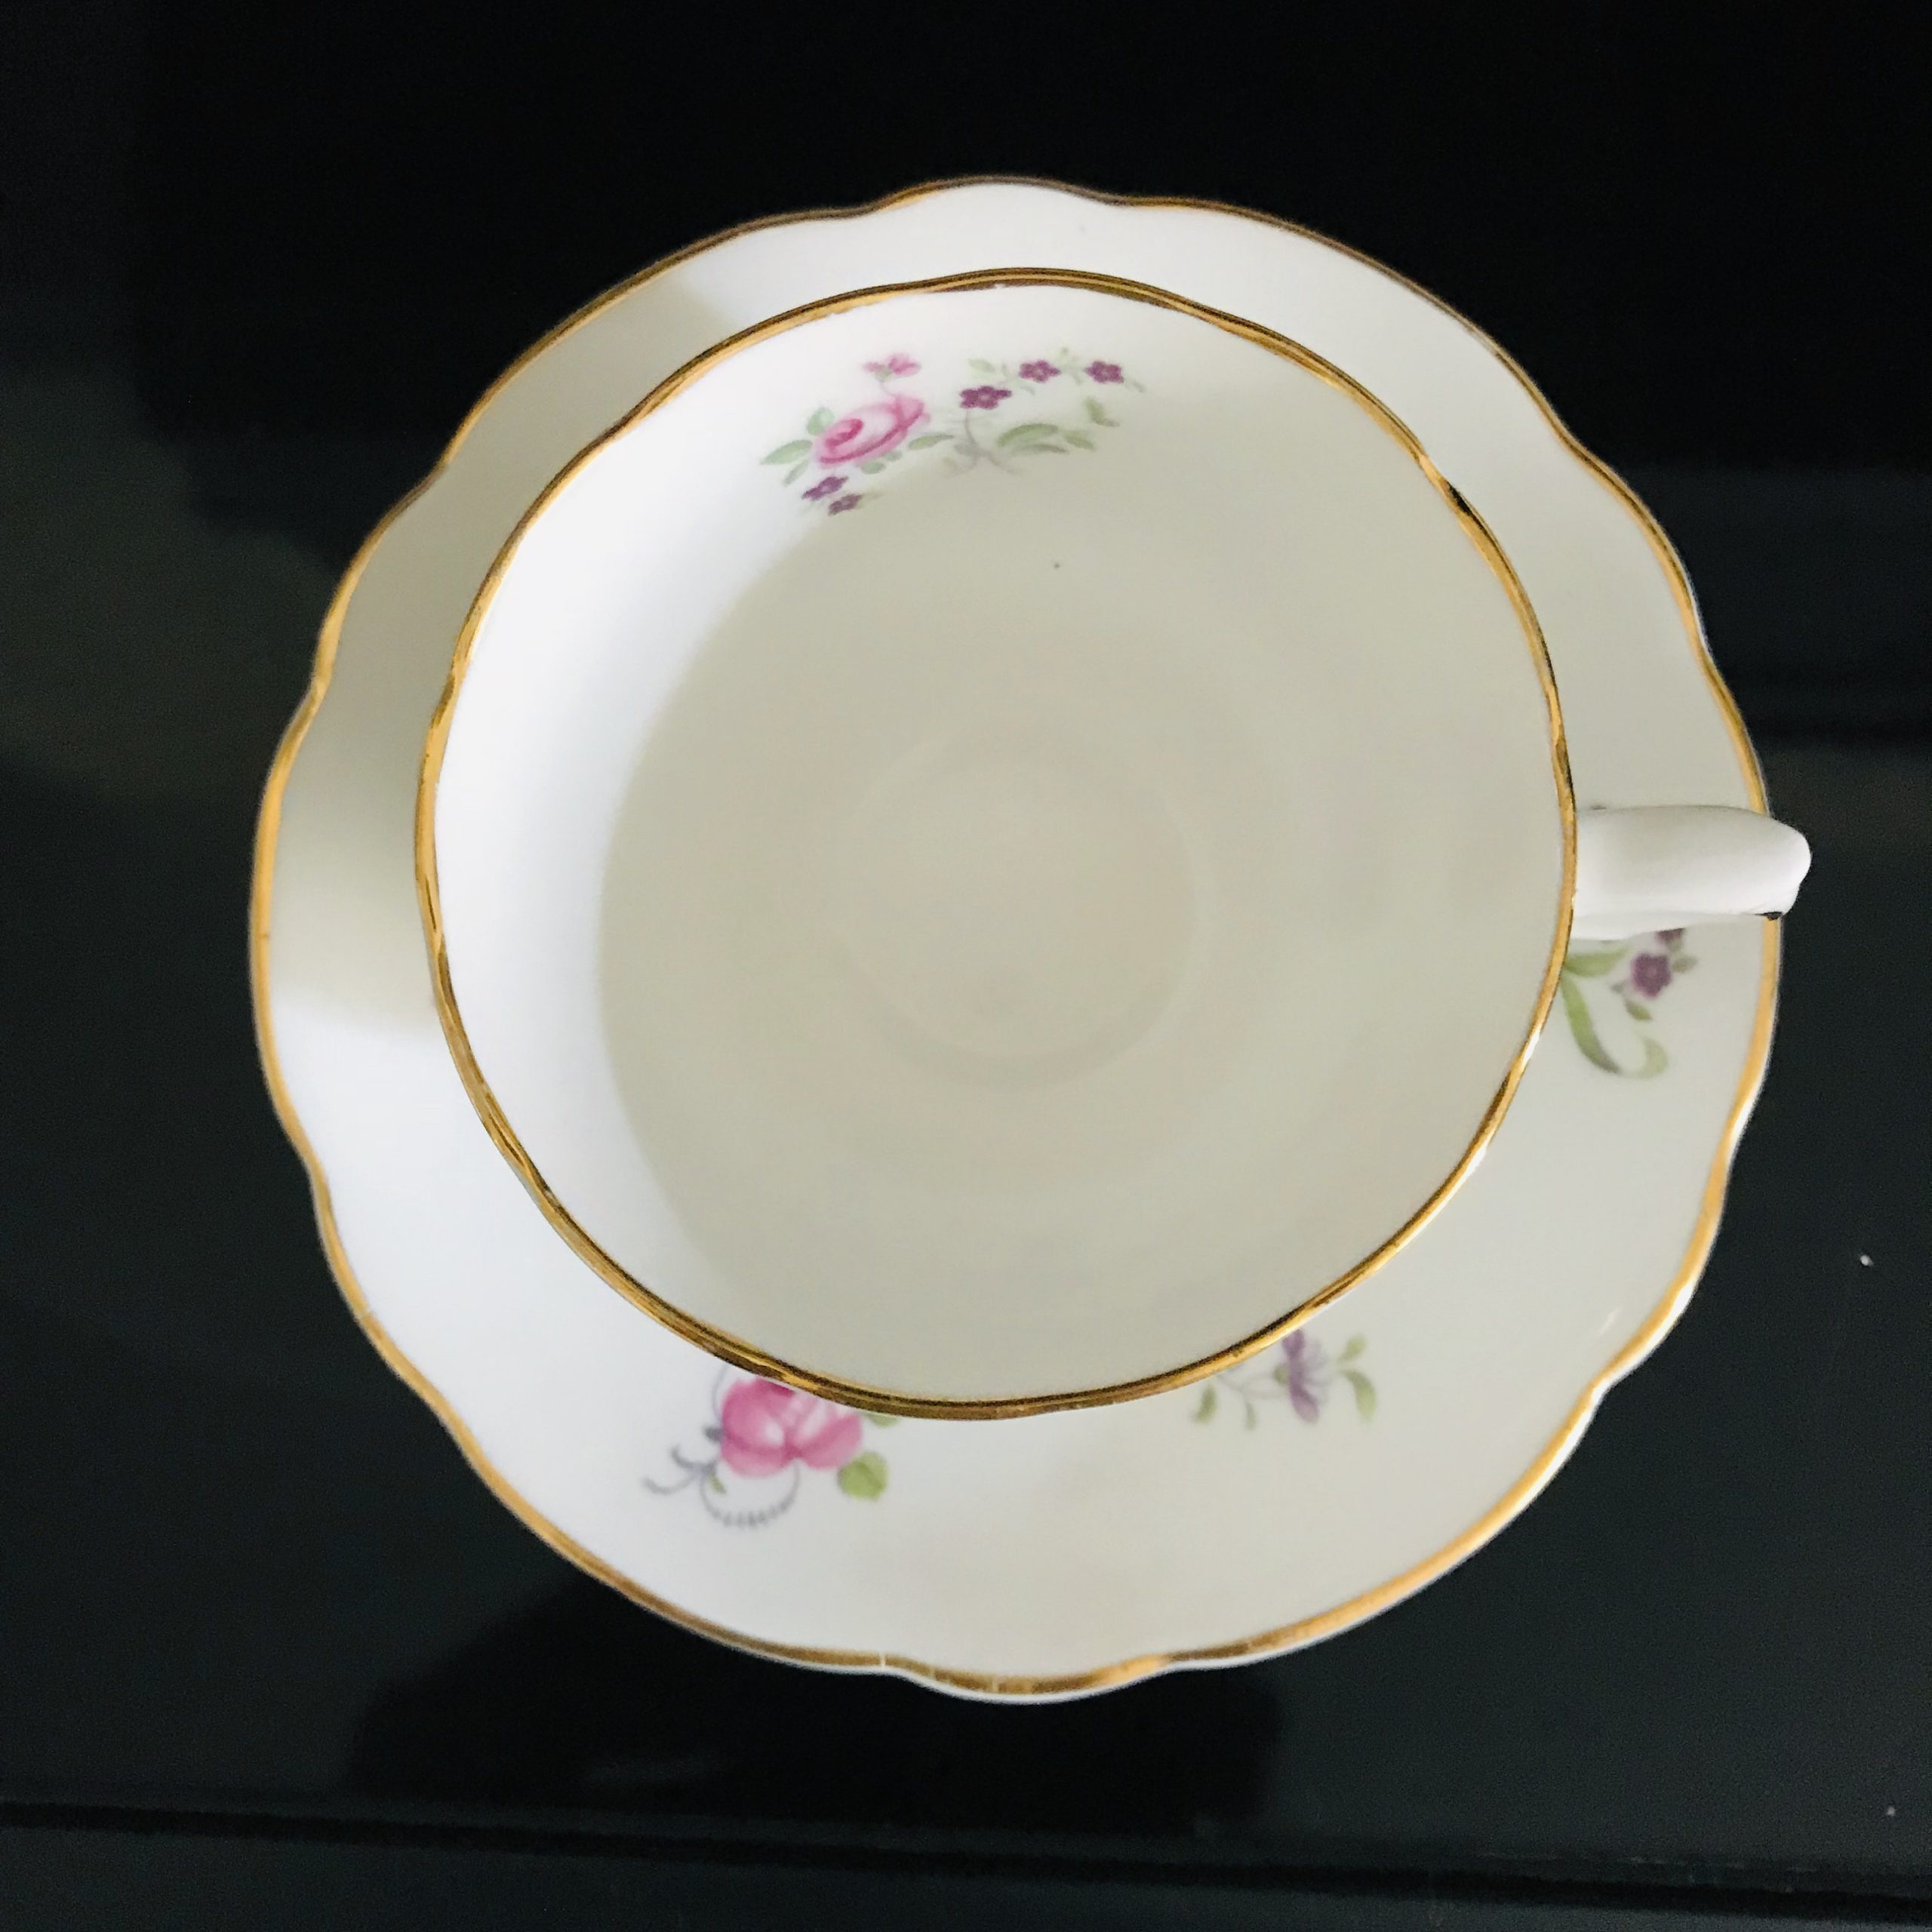 Crown Staffordshire tea cup and saucer England Fine bone china Pink ...